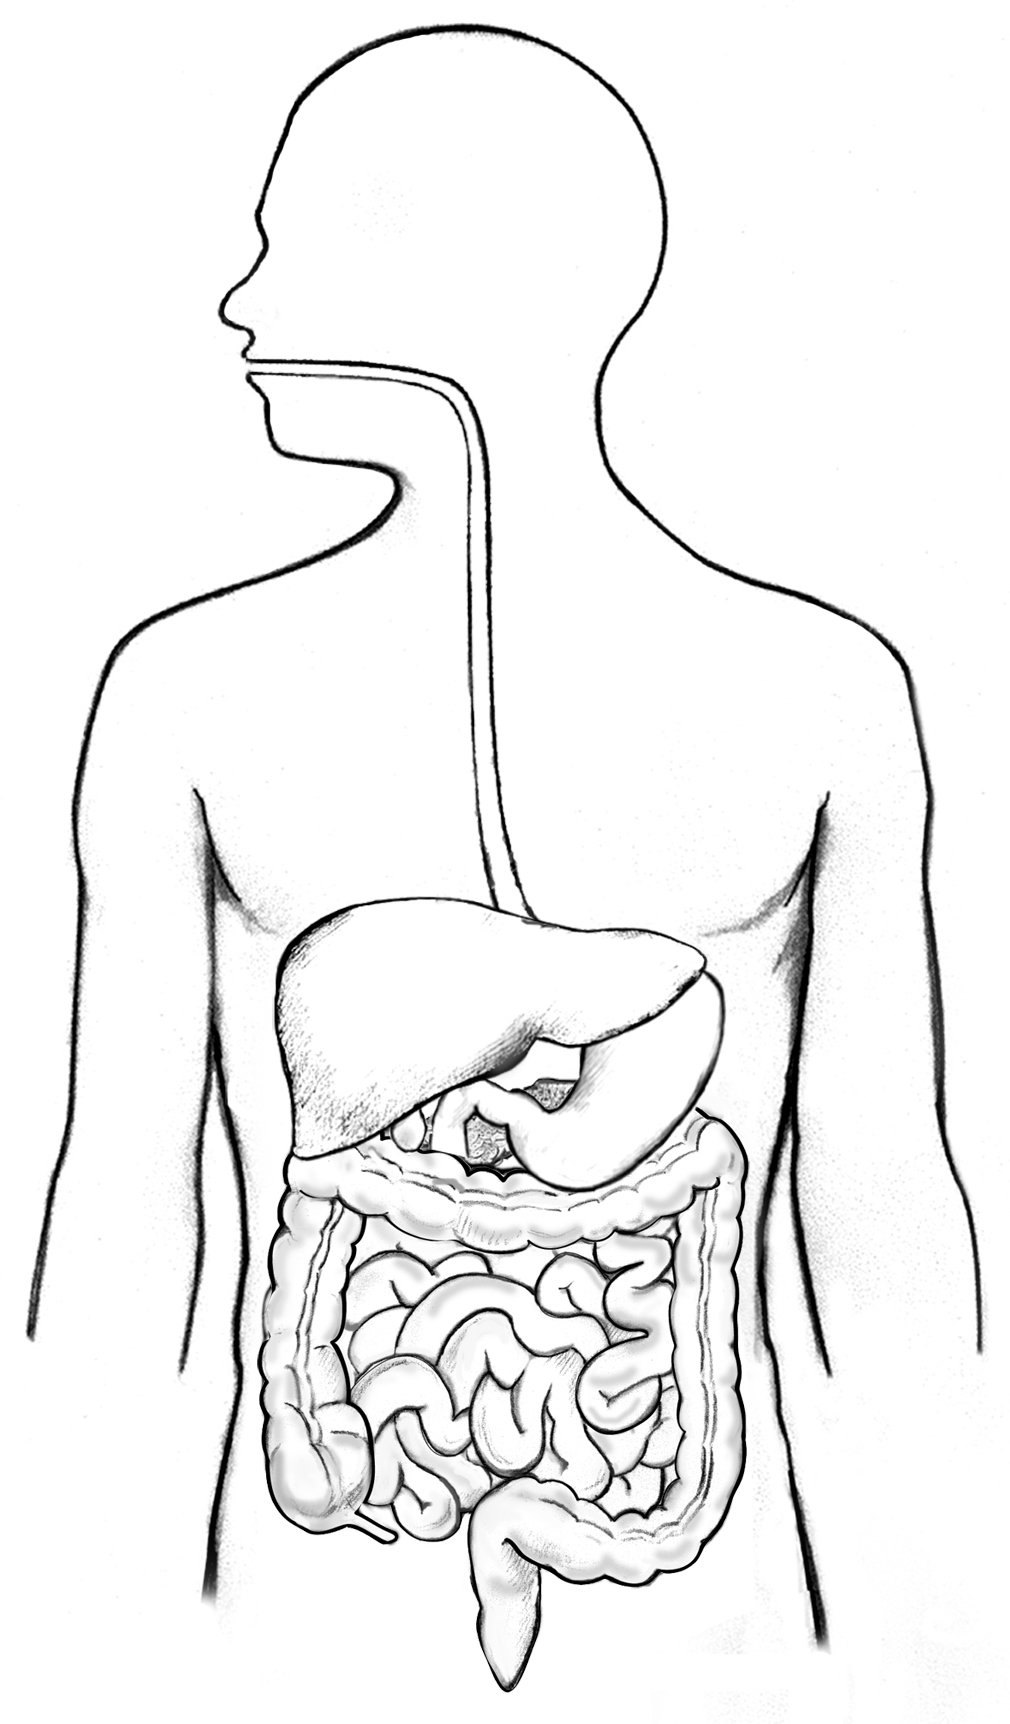 real digestive system without labels